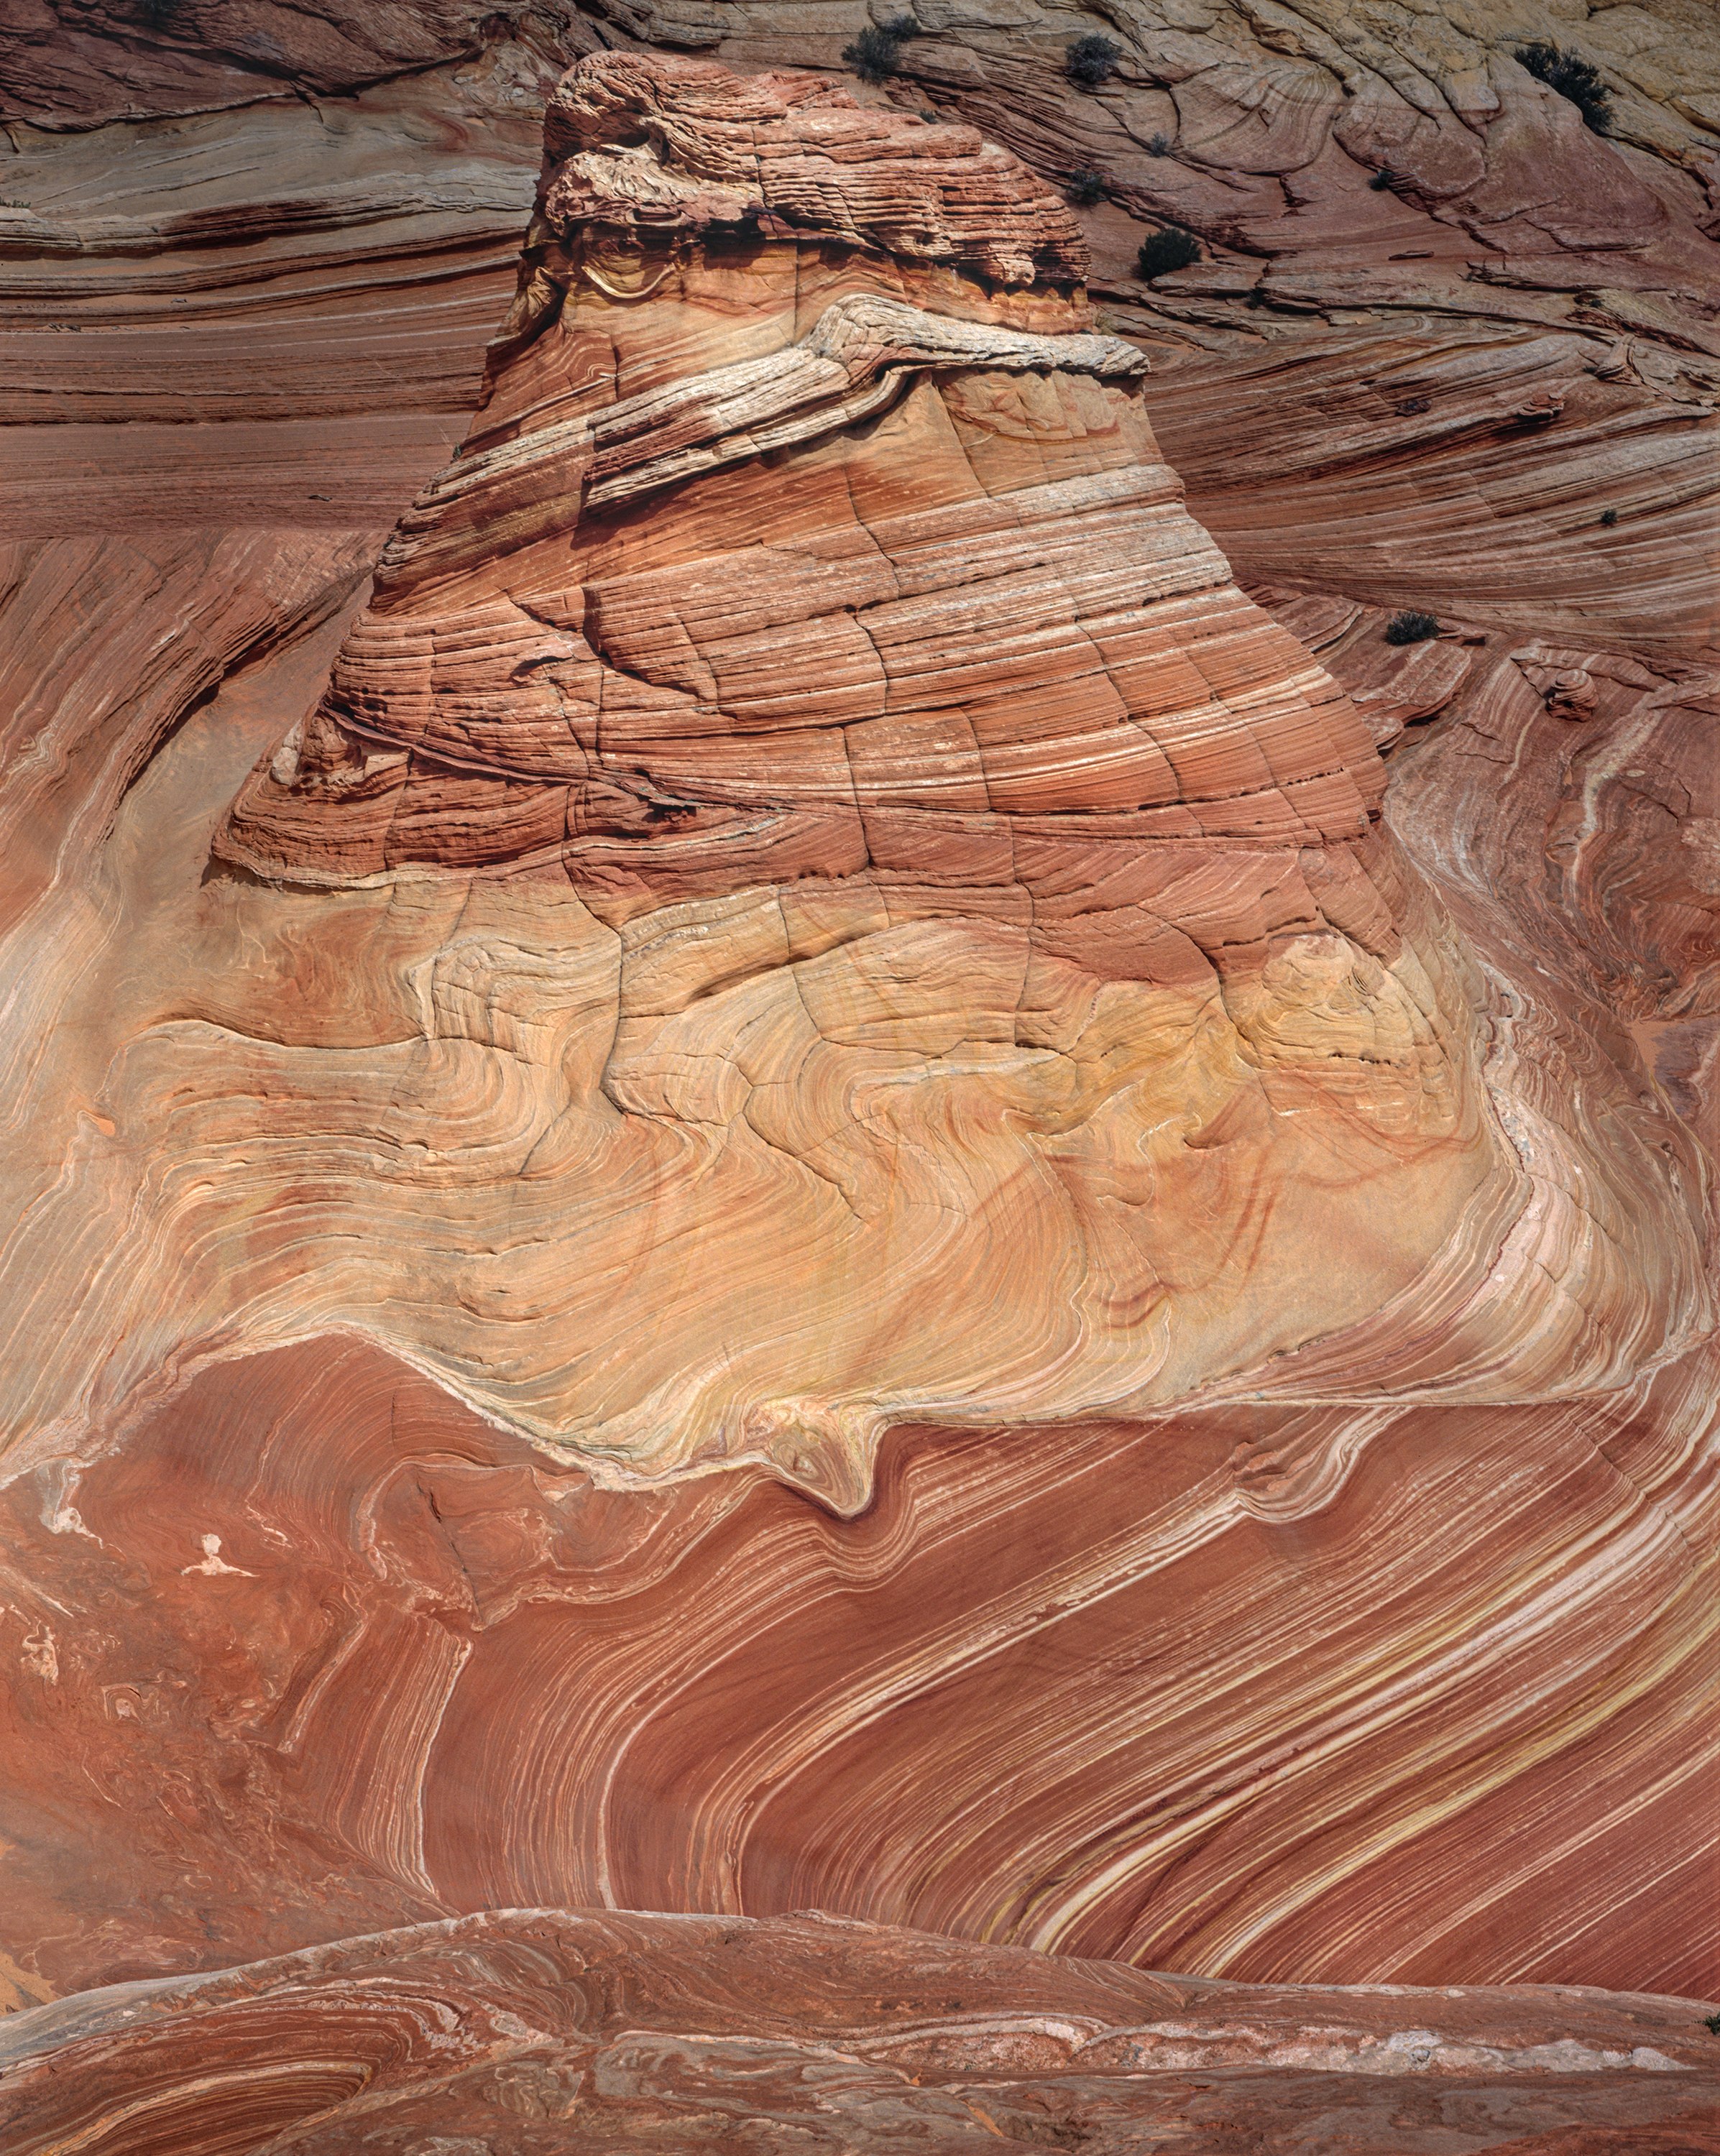 Outcrop, Coyote Buttes, Utah